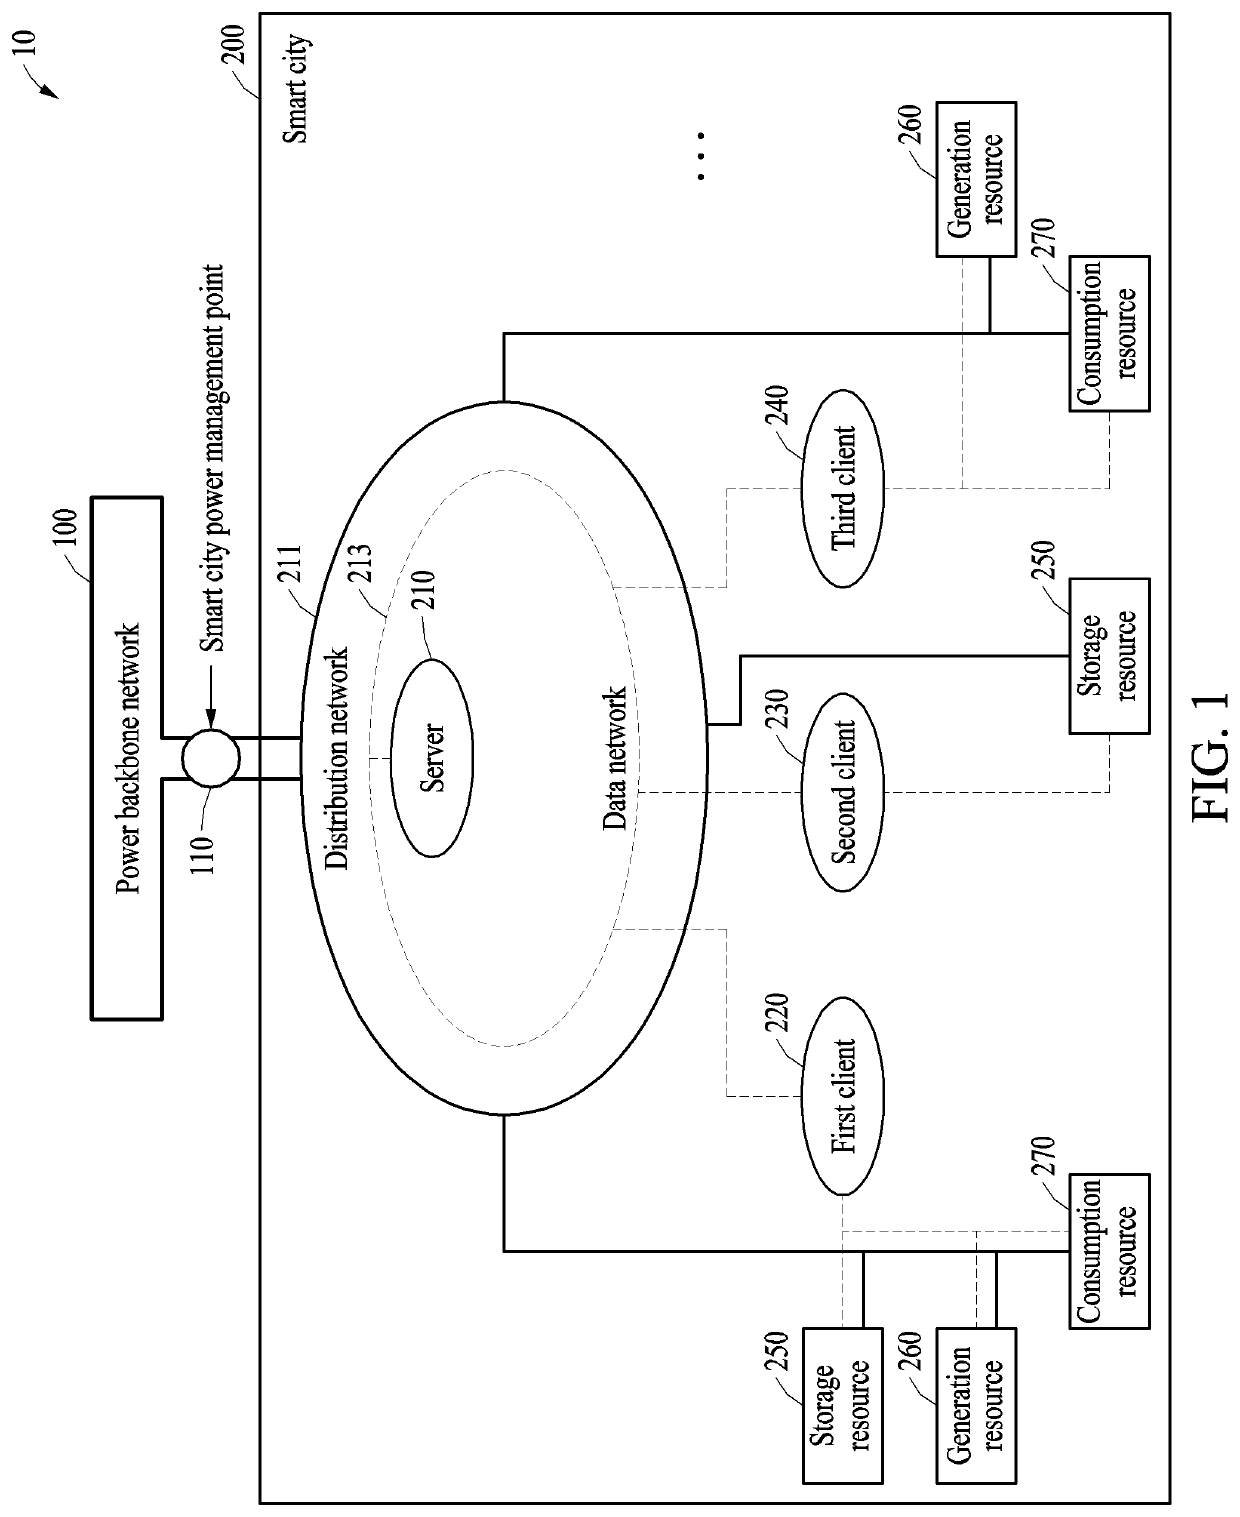 Method for controlling energy storage system and devices performing method